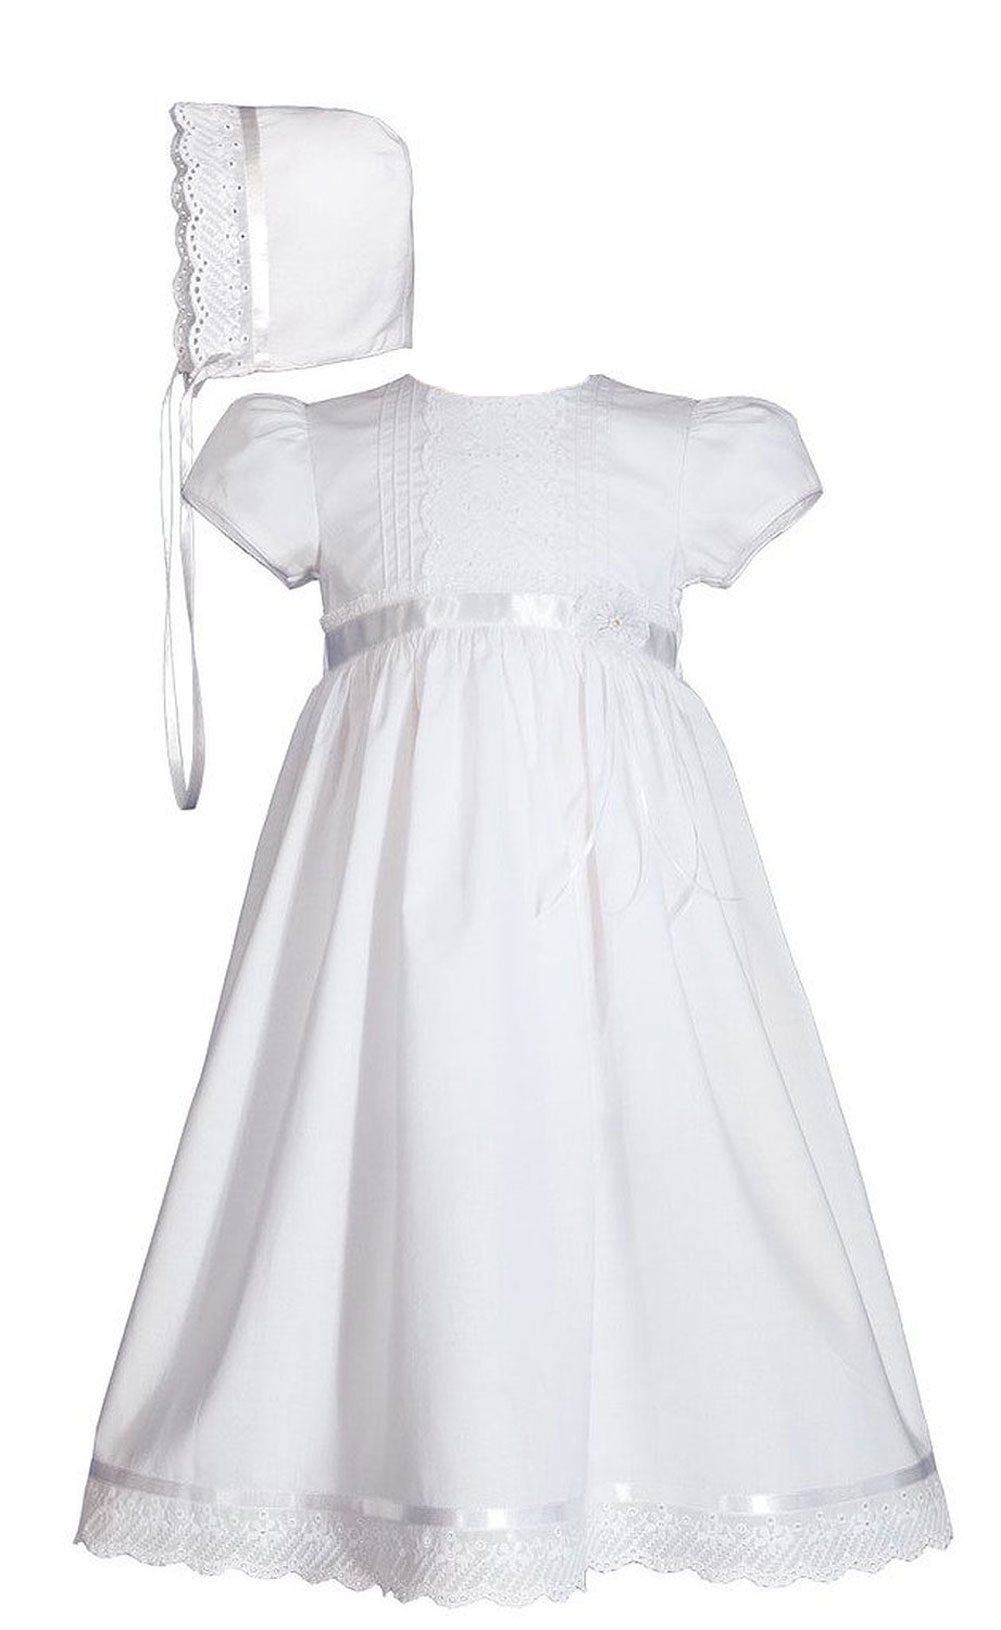 Little Things Mean A Lot 100/% Cotton Handmade Girls Christening Special Occasion Dress with Italian Lace